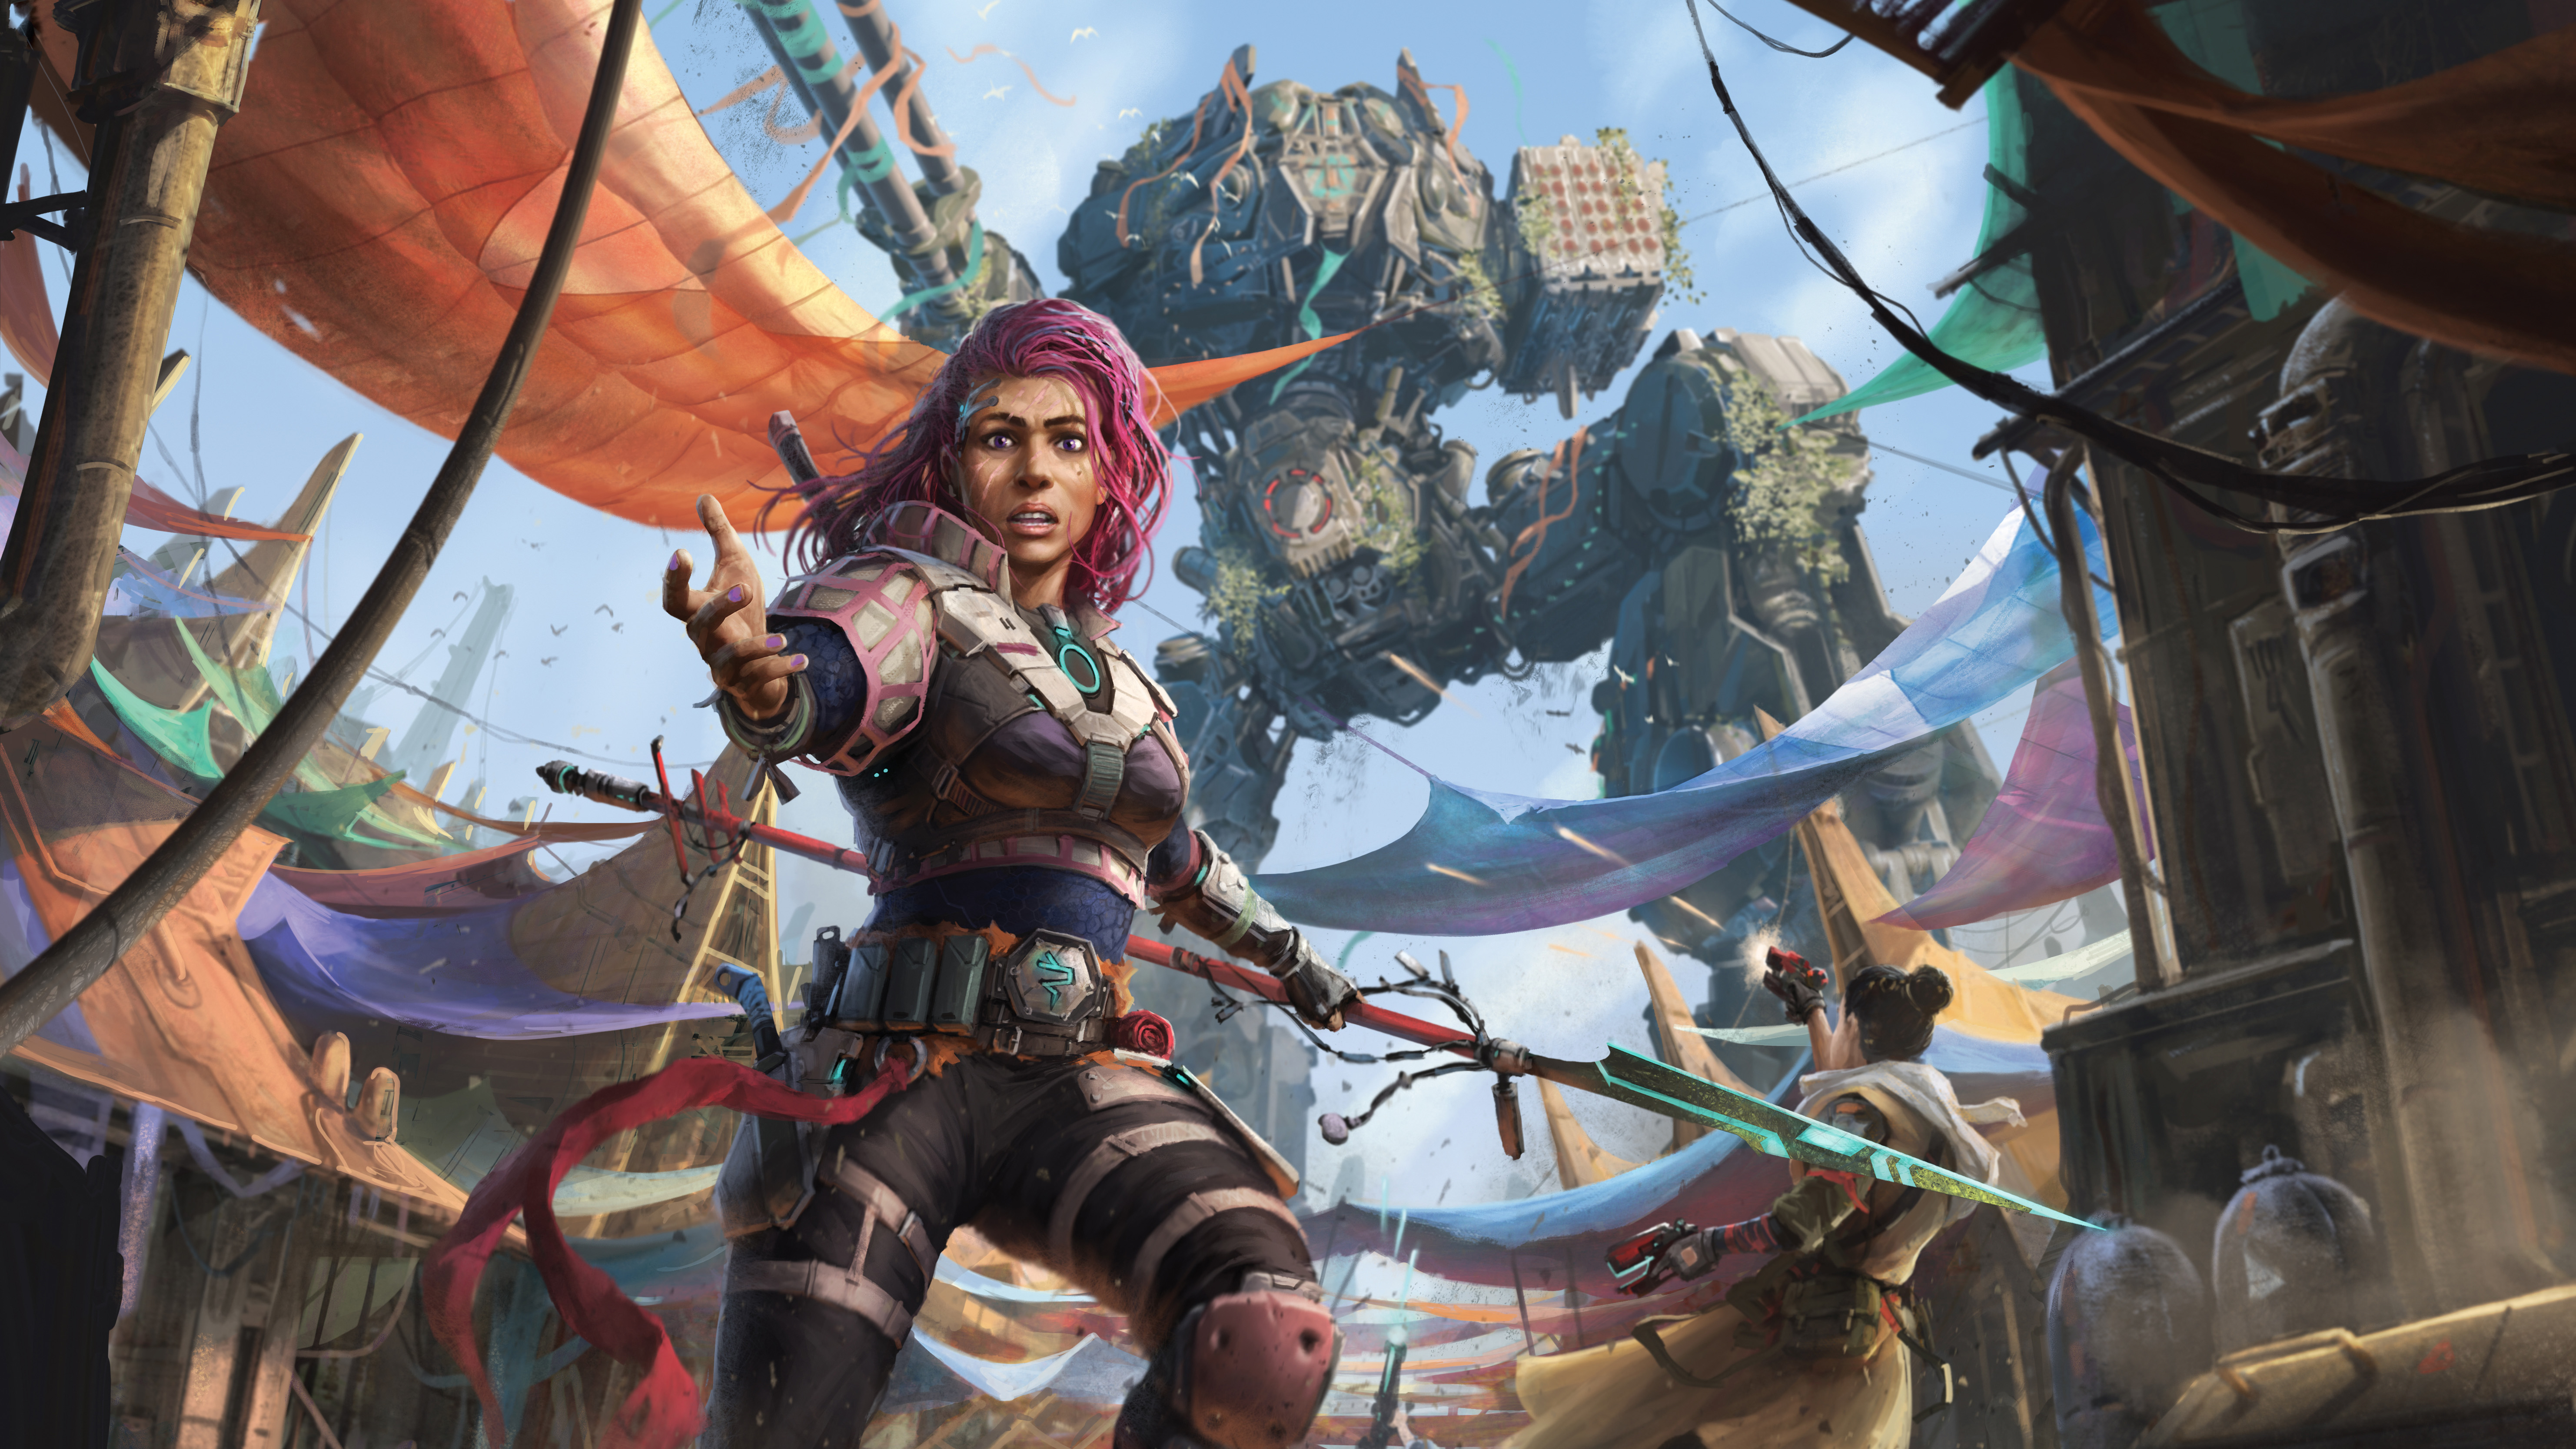 A woman wearing scavenged armor and holding a wicked looking spear with a glass blade reaches out of the frame imploring the viewer to do something about this ancient marauding battlemech.